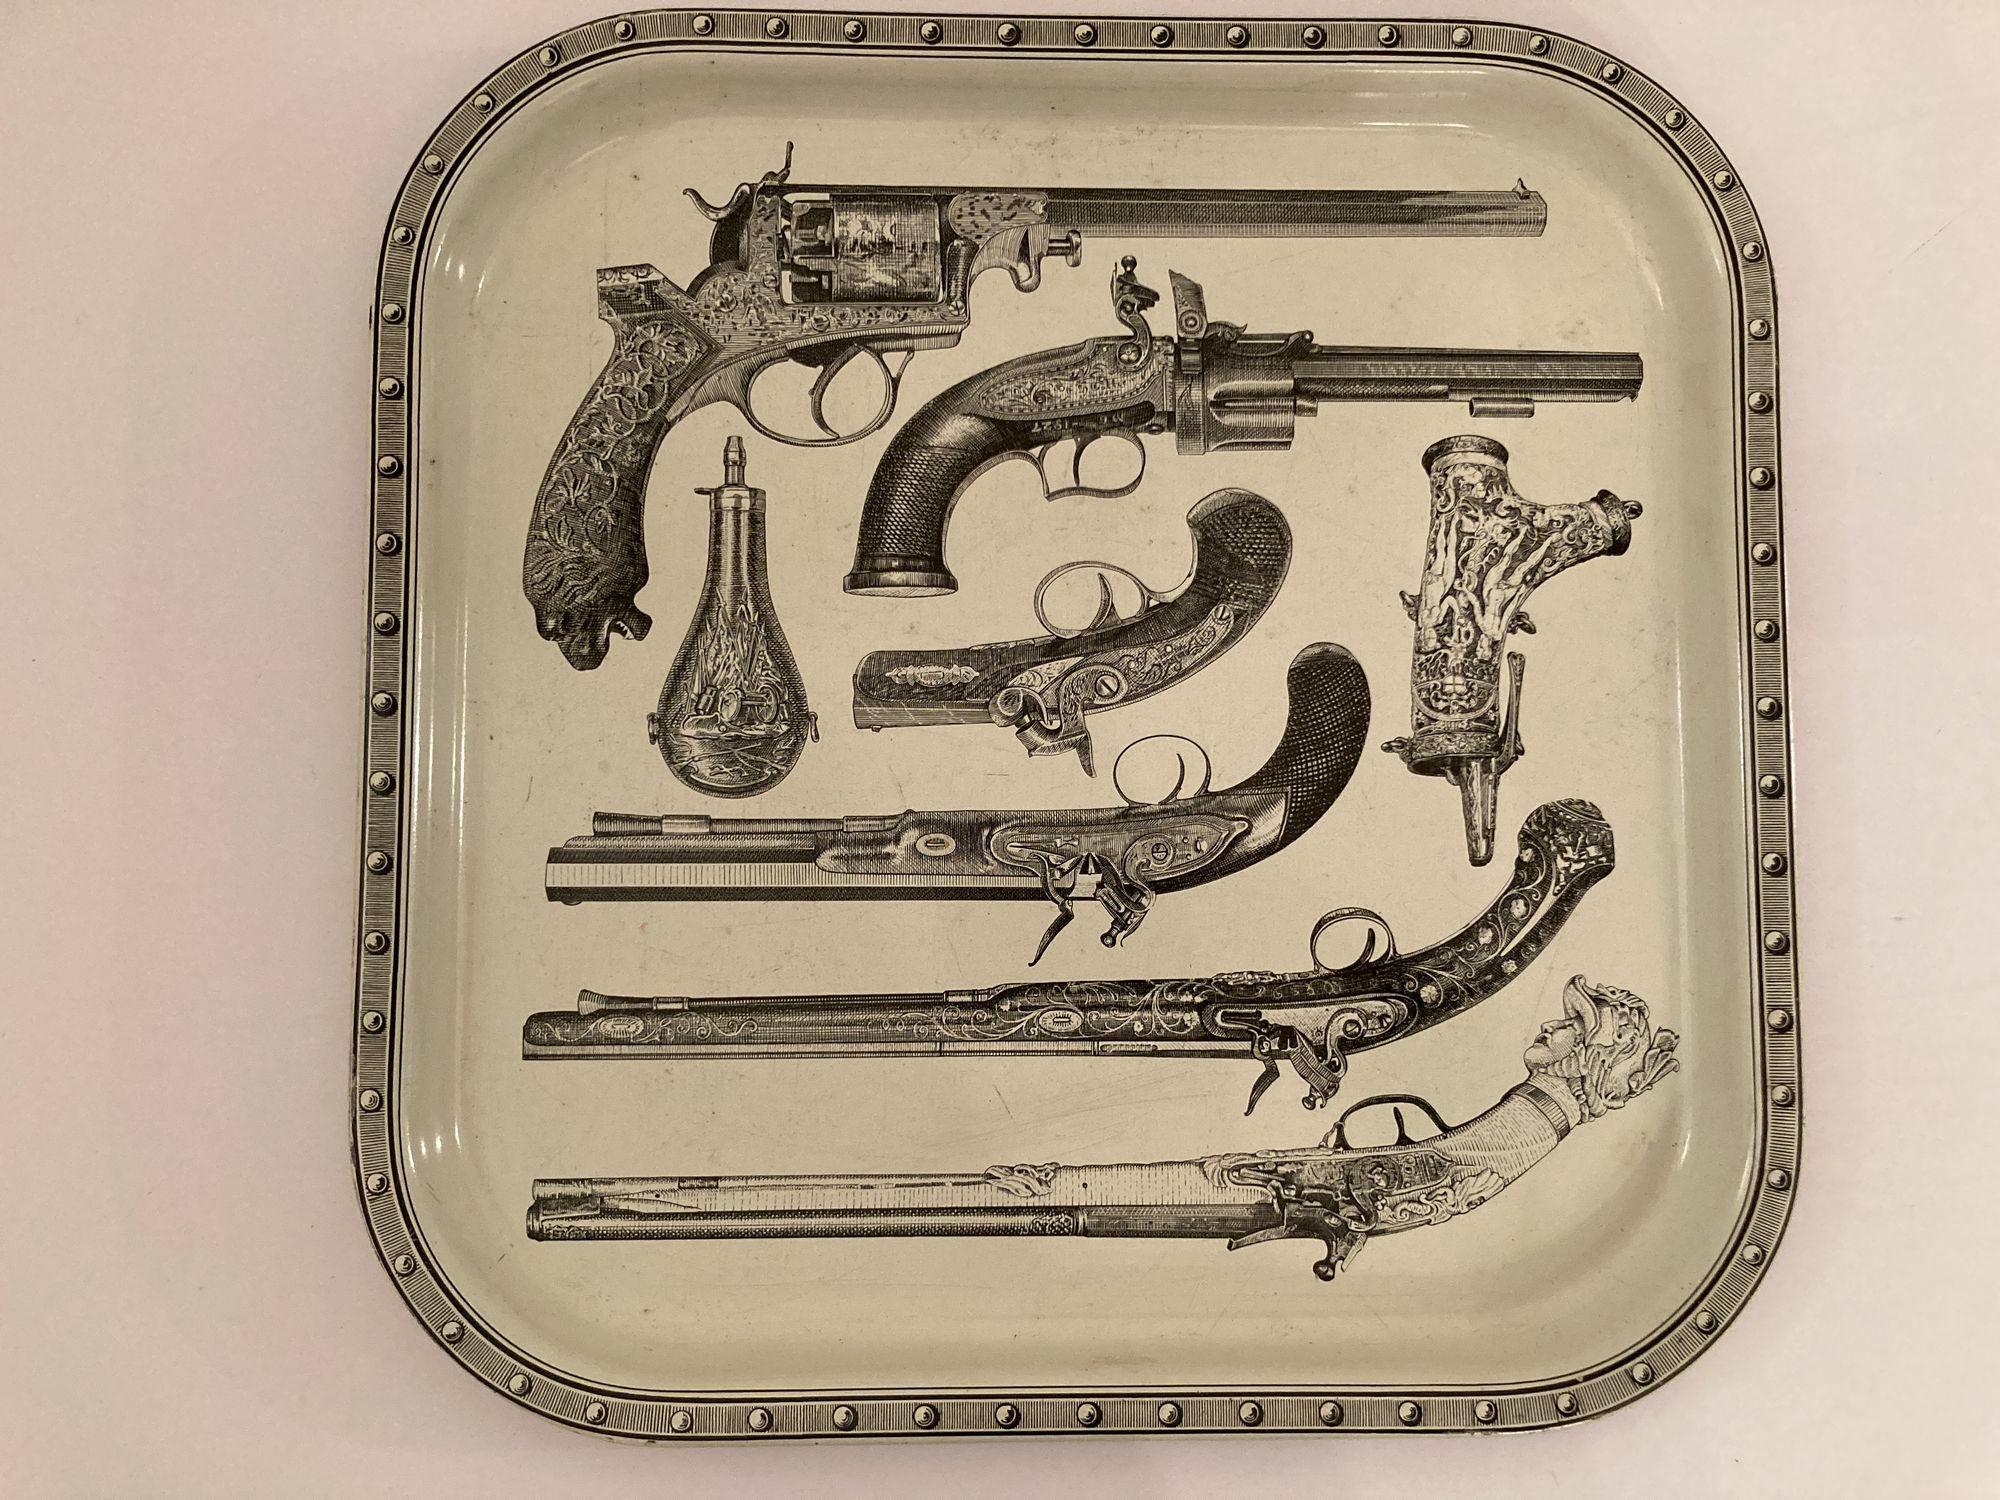 Piero Fornasetti Attributed Pistol Barware Metal Serving Tray, 1960s For Sale 8